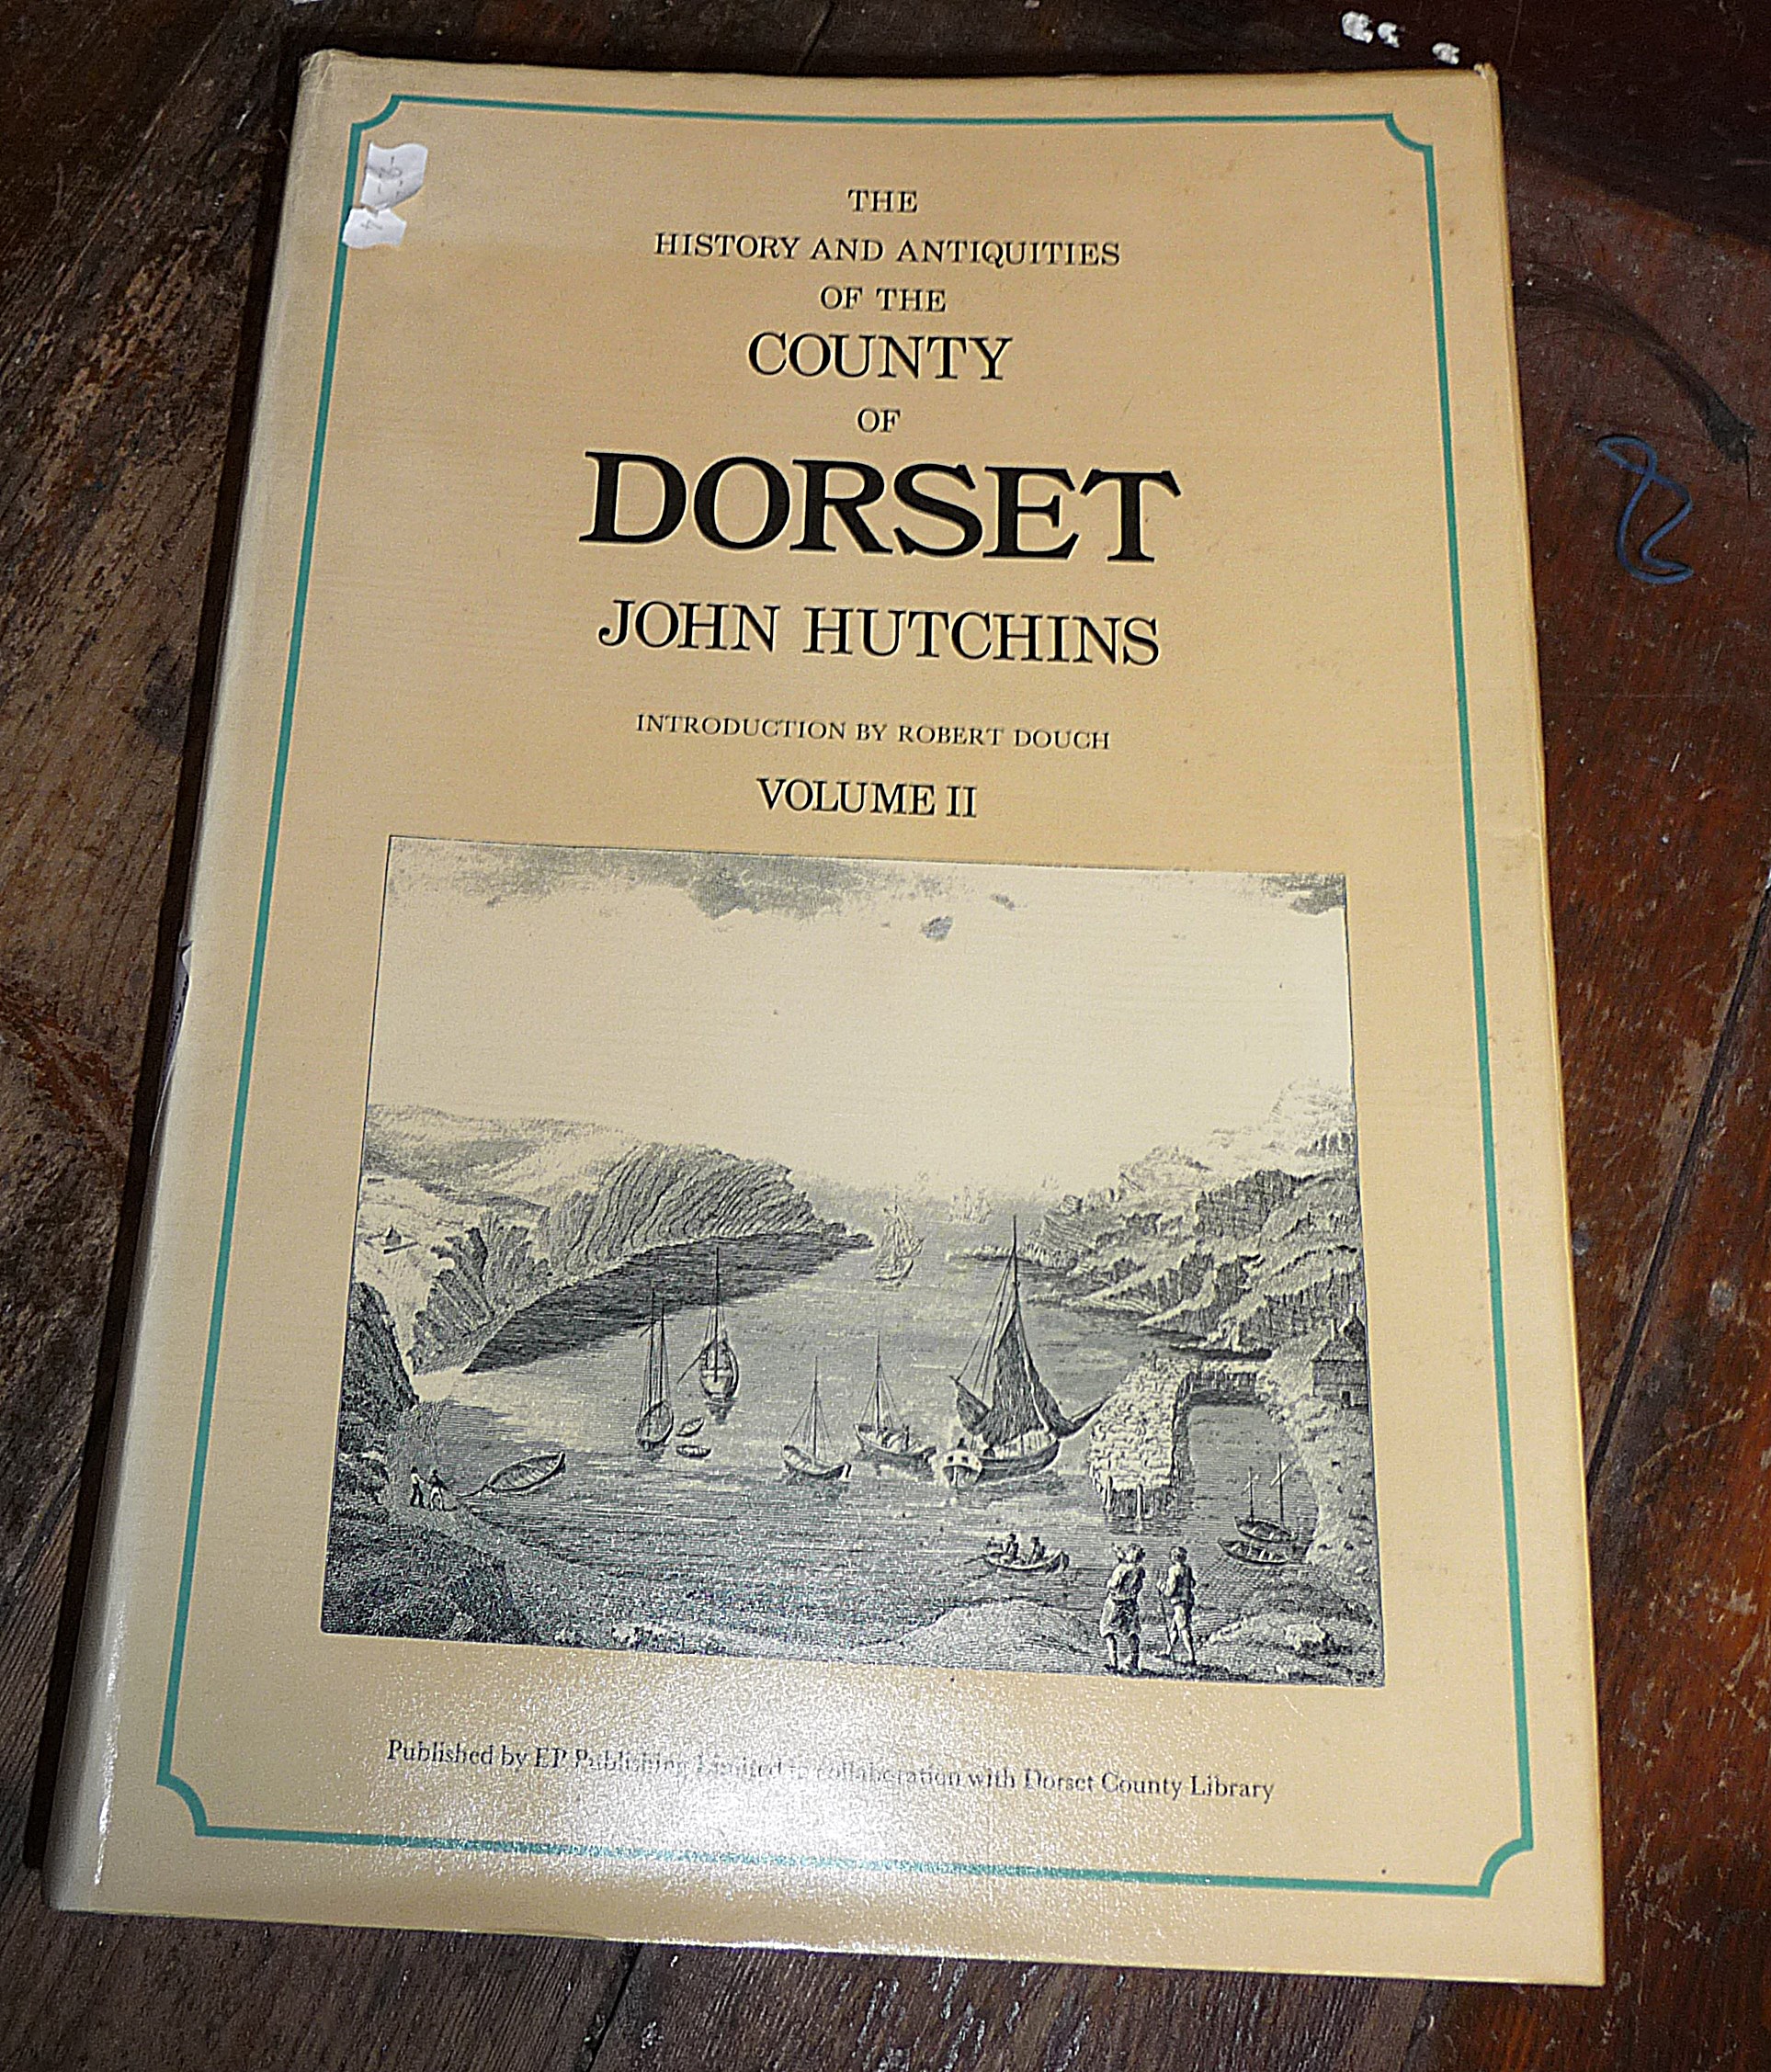 The History and Antiquities of the County of Dorset, John Hutchins Vol II, Third Edition, reprint - Image 2 of 4